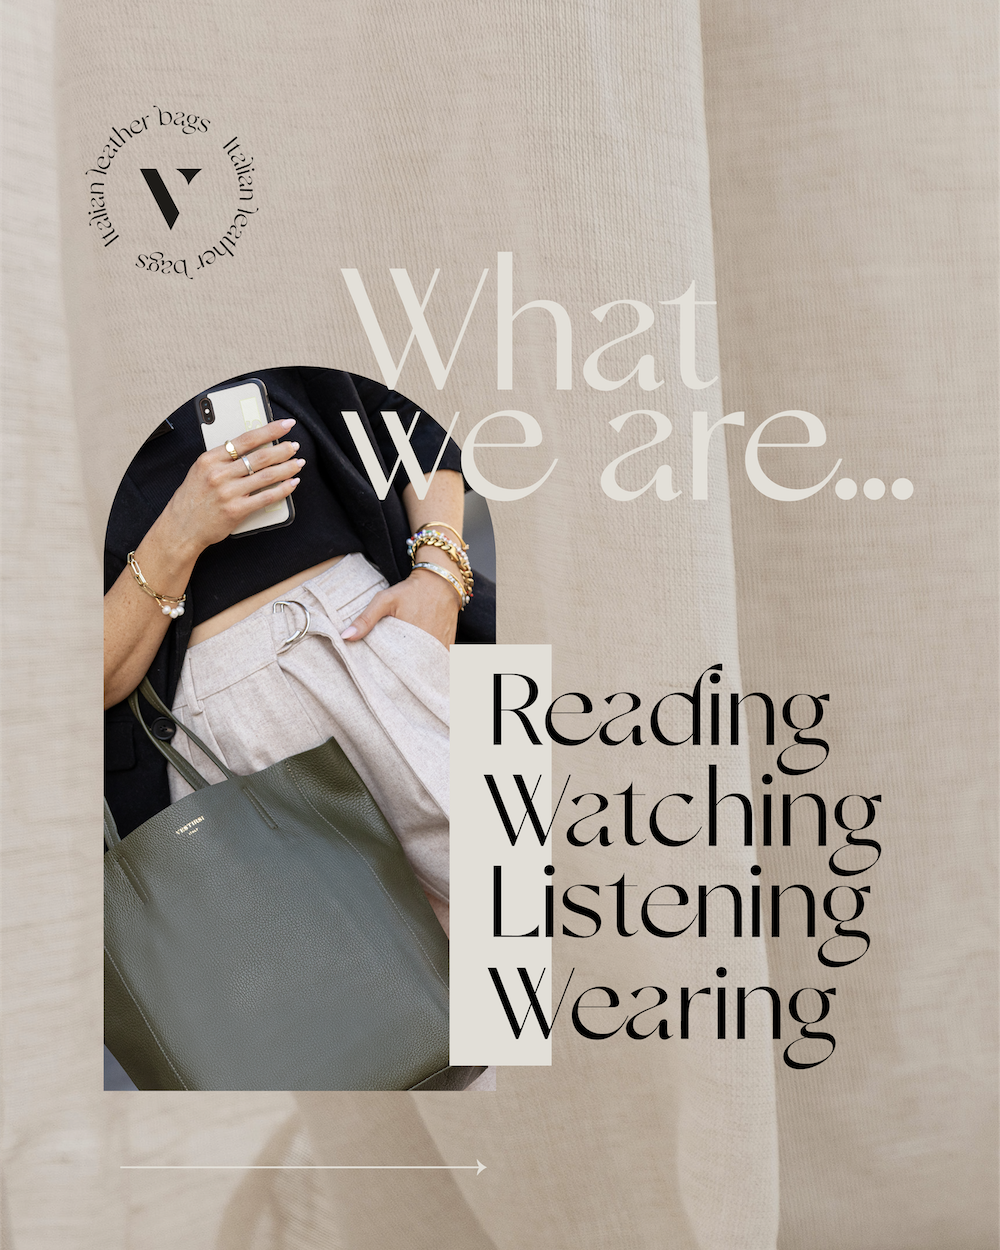 WHAT WE ARE READING WATCHING LISTENING WEARING